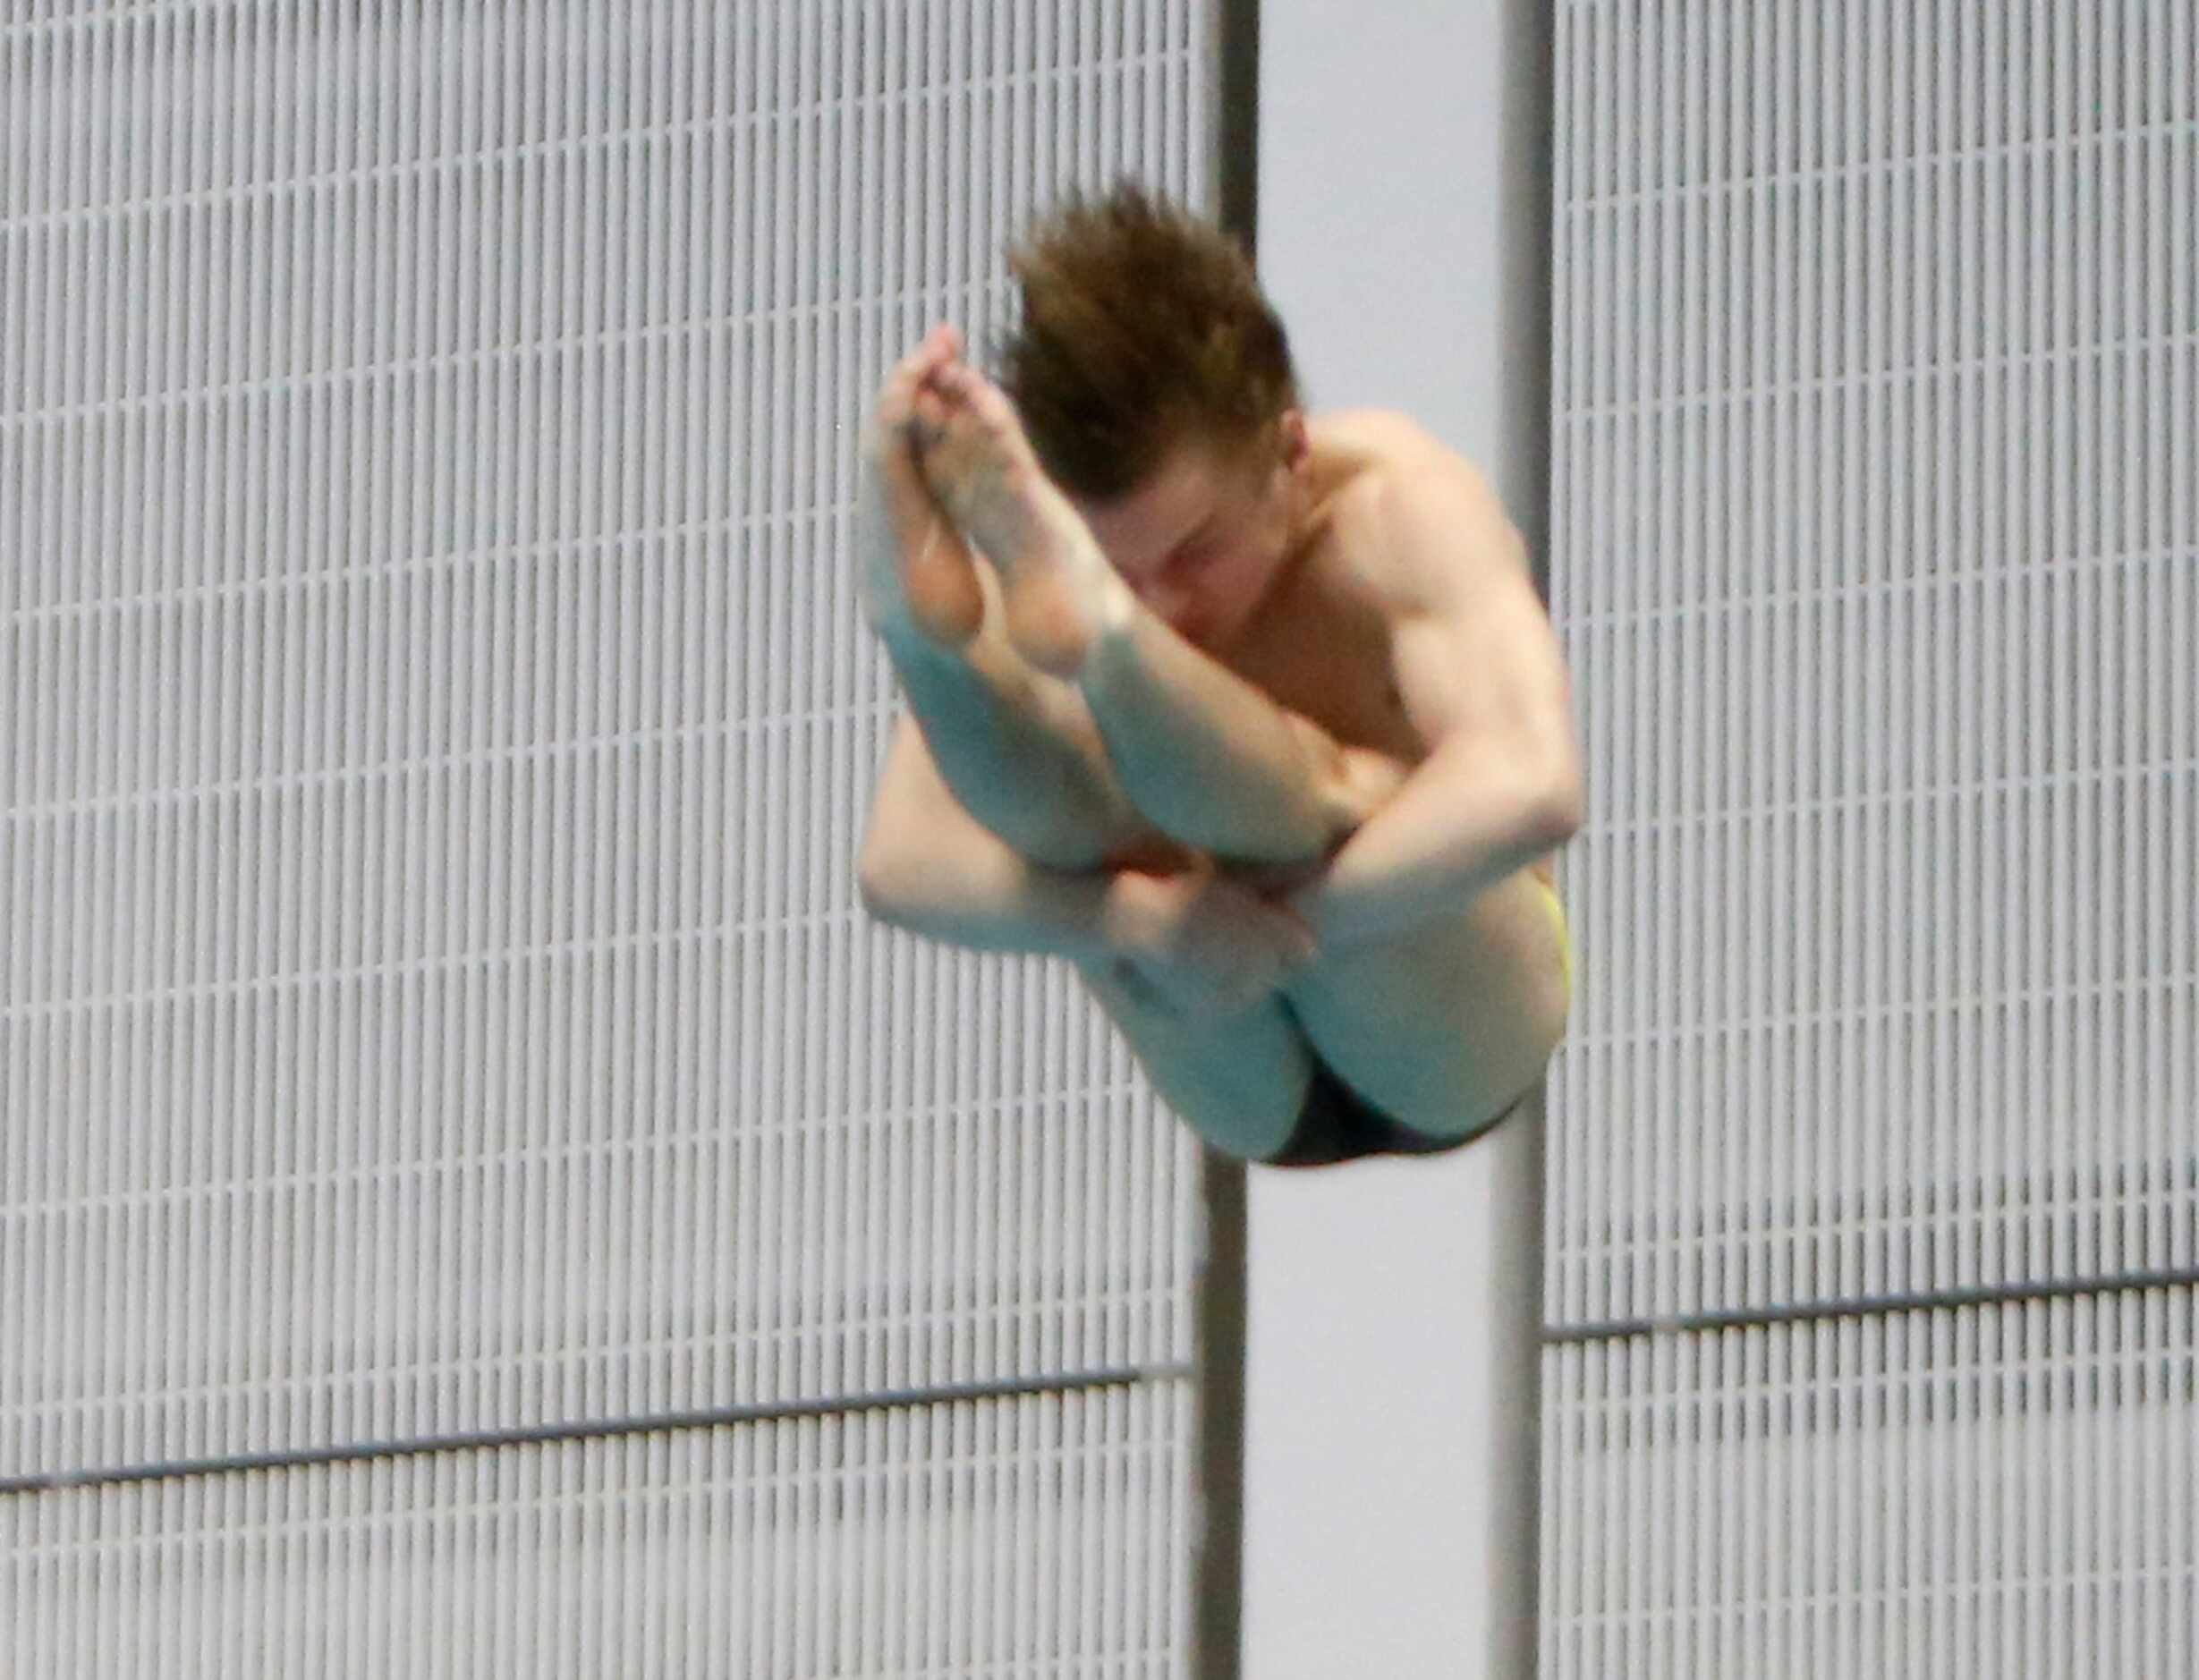 Keller Fossil Ridge diver Colton Cryer competes in the 6A Boys Diving competition. The first...